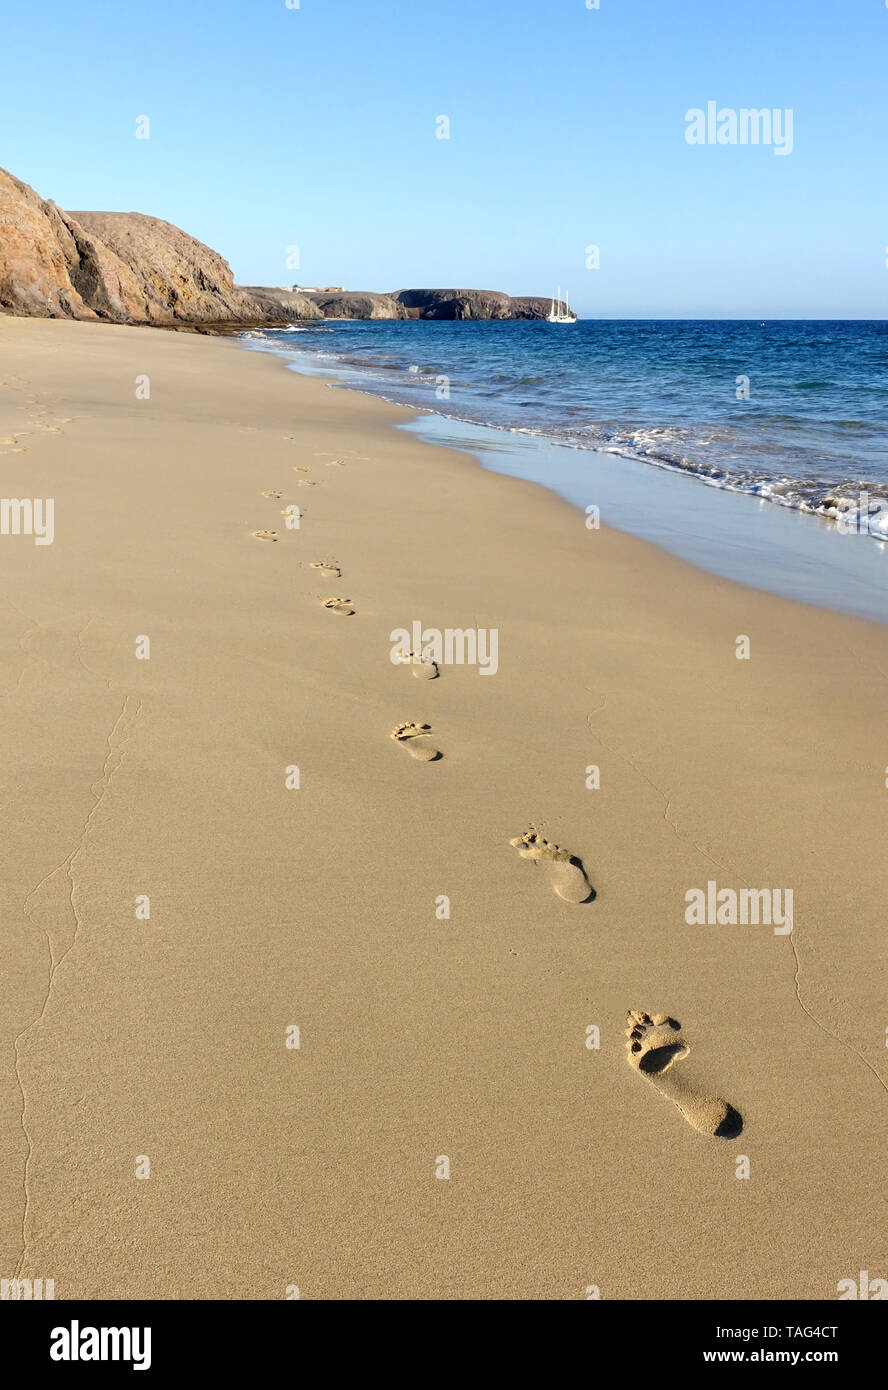 A trail of adult foot prints are left on the shore in the golden sand on Papagayo beach, Lanzarote. The beach is bathed in warm evening sunshine Stock Photo